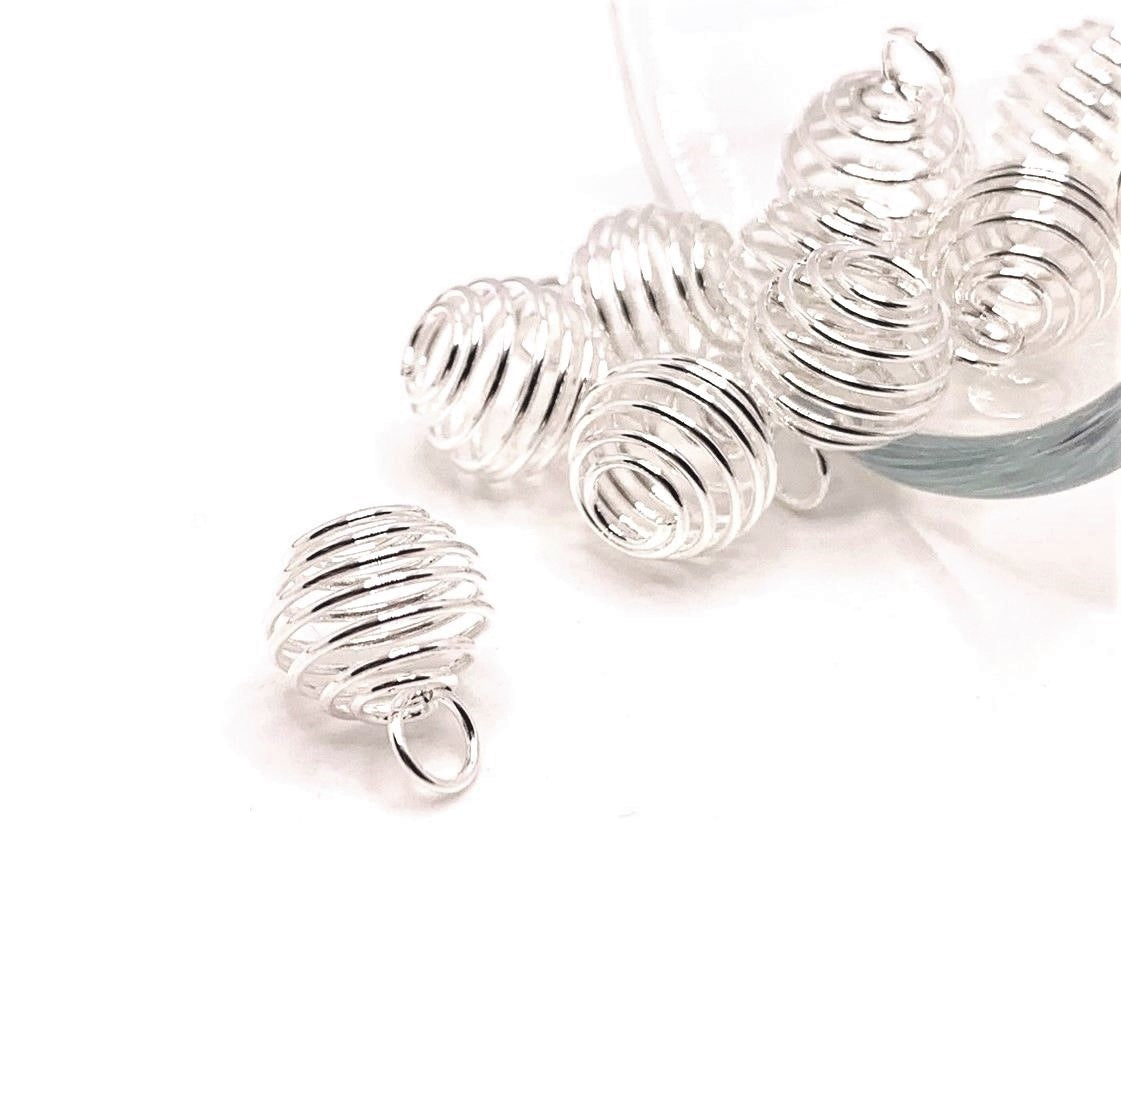 4, 20 or 50 Pieces: 8 mm Silver Spiral Lantern Bead Cages